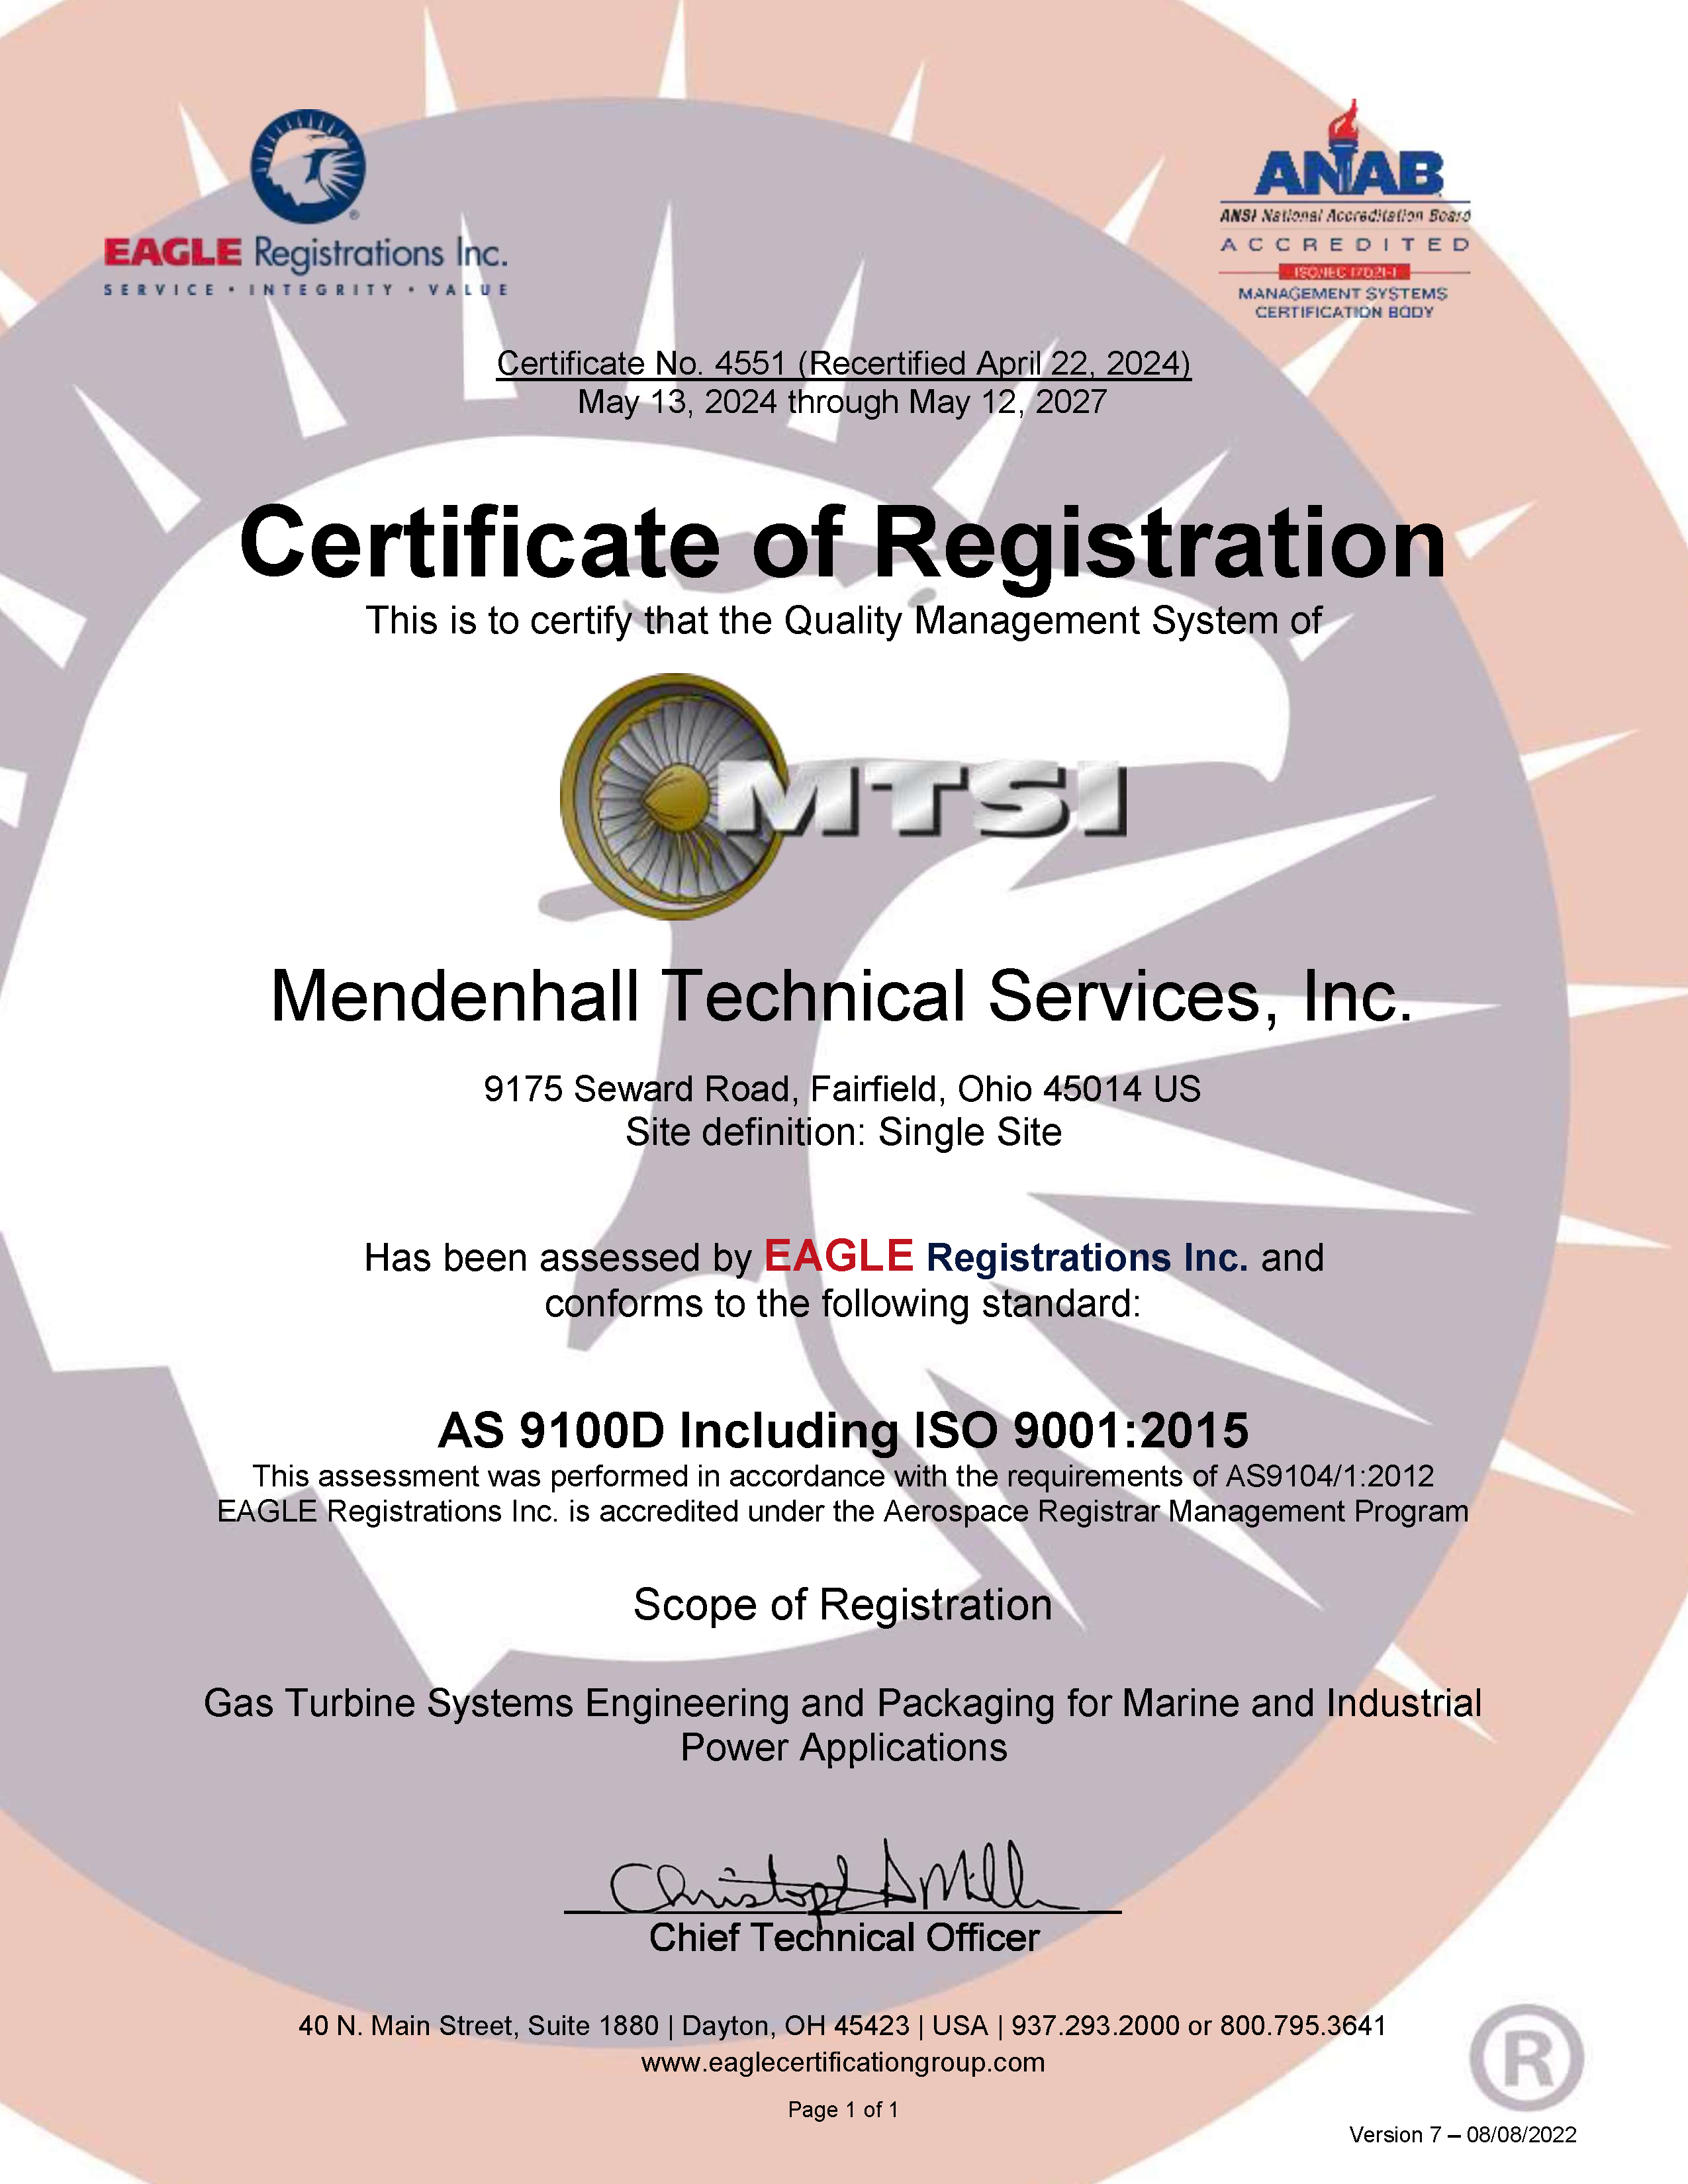 AS9100D including ISO 9001:2015 Certificate